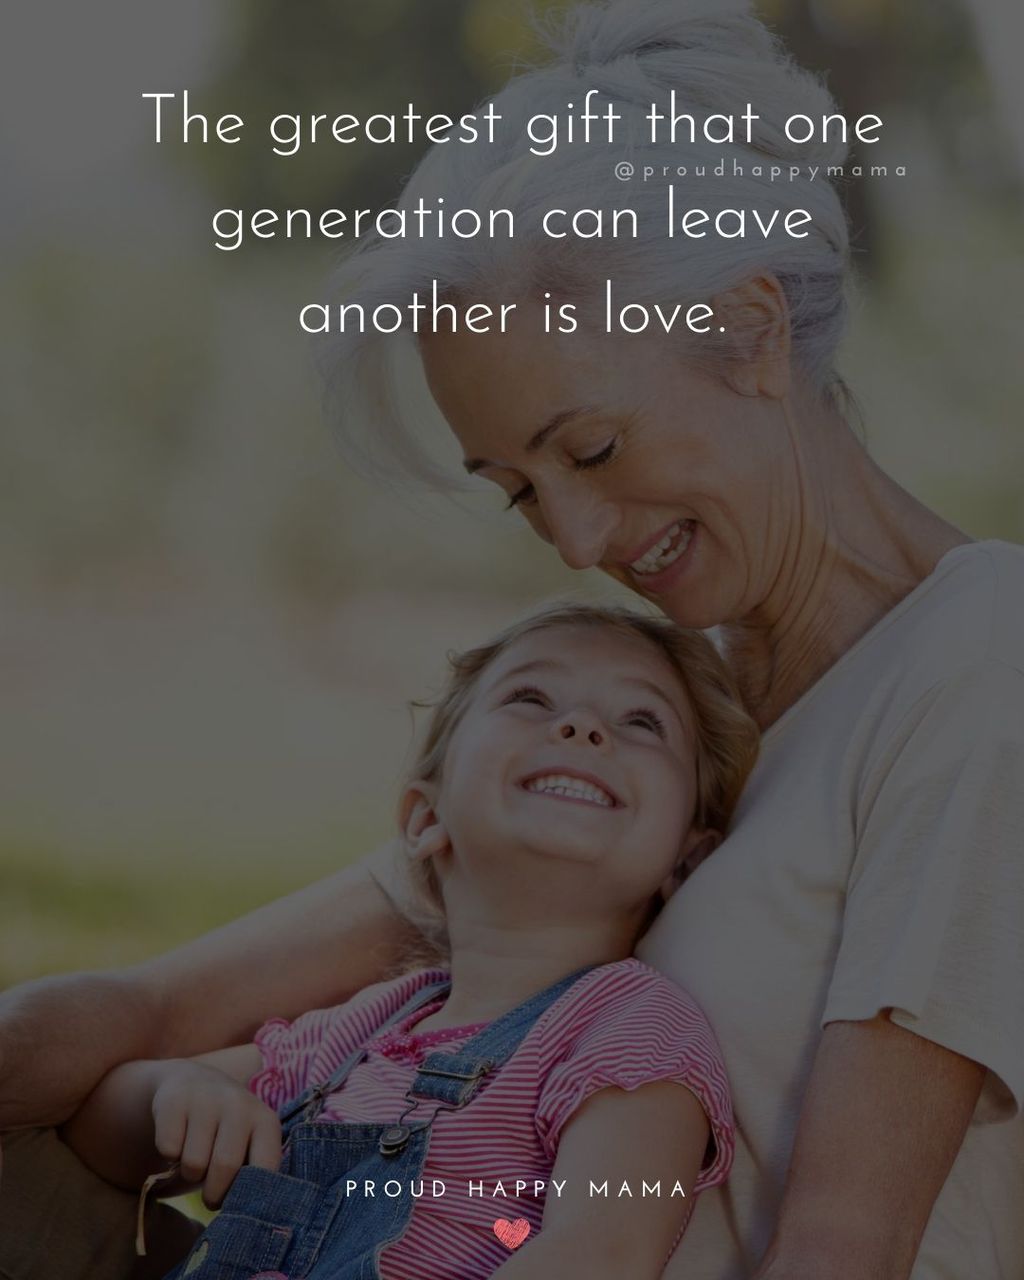 Love Quotes For Grandparents | The greatest gift that one generation can leave another is love.